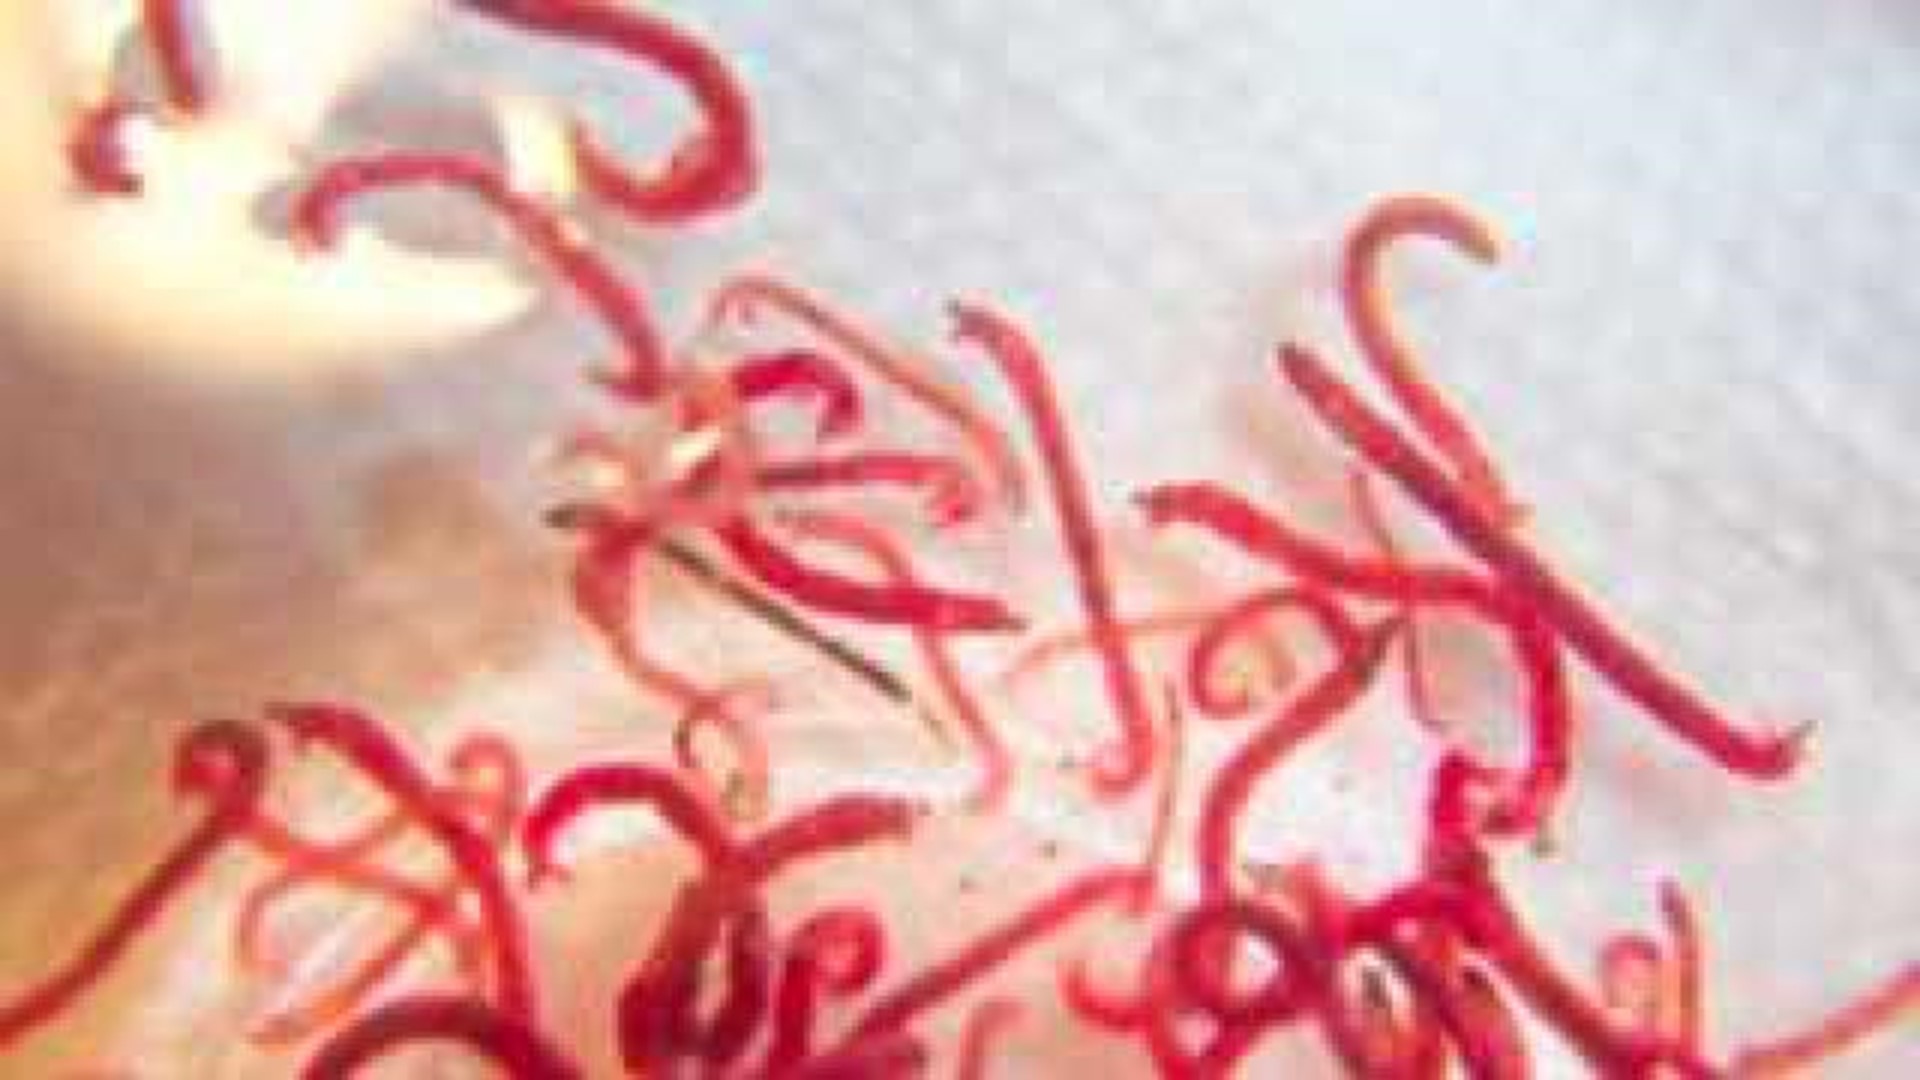 Blood Worms In Water Close Schools For Rest Of Week